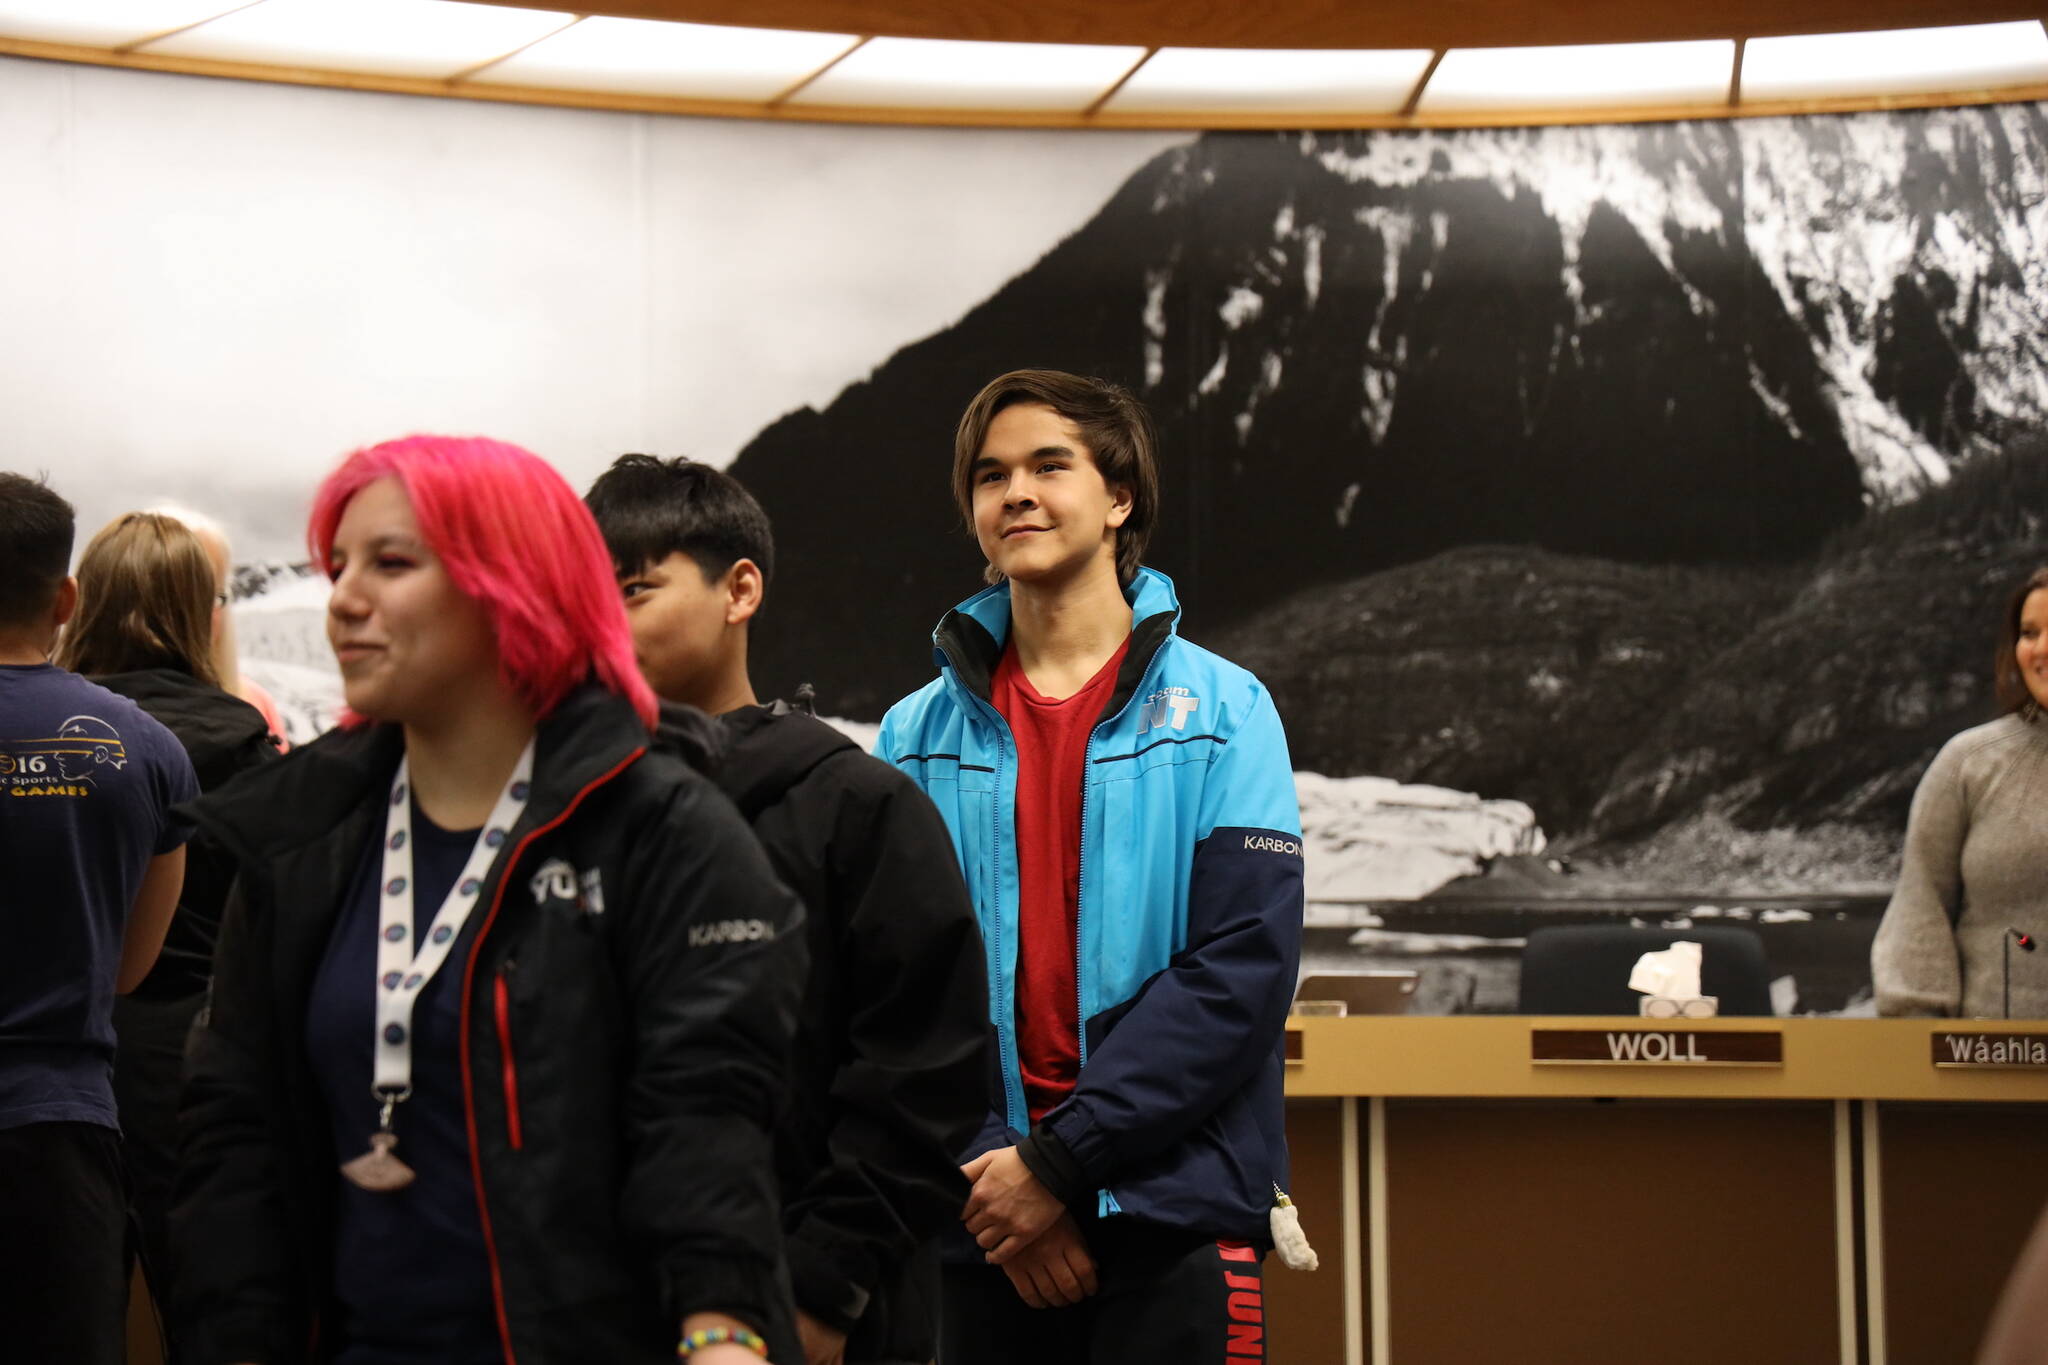 Nathan Blake waits to shake hands with City and Borough of Juneau administration and Assembly members Monday night after being honored alongside other athletes for their representation of Juneau for Team Alaska at the 2023 Arctic Winter Games in February. (Clarise Larson / Juneau Empire)